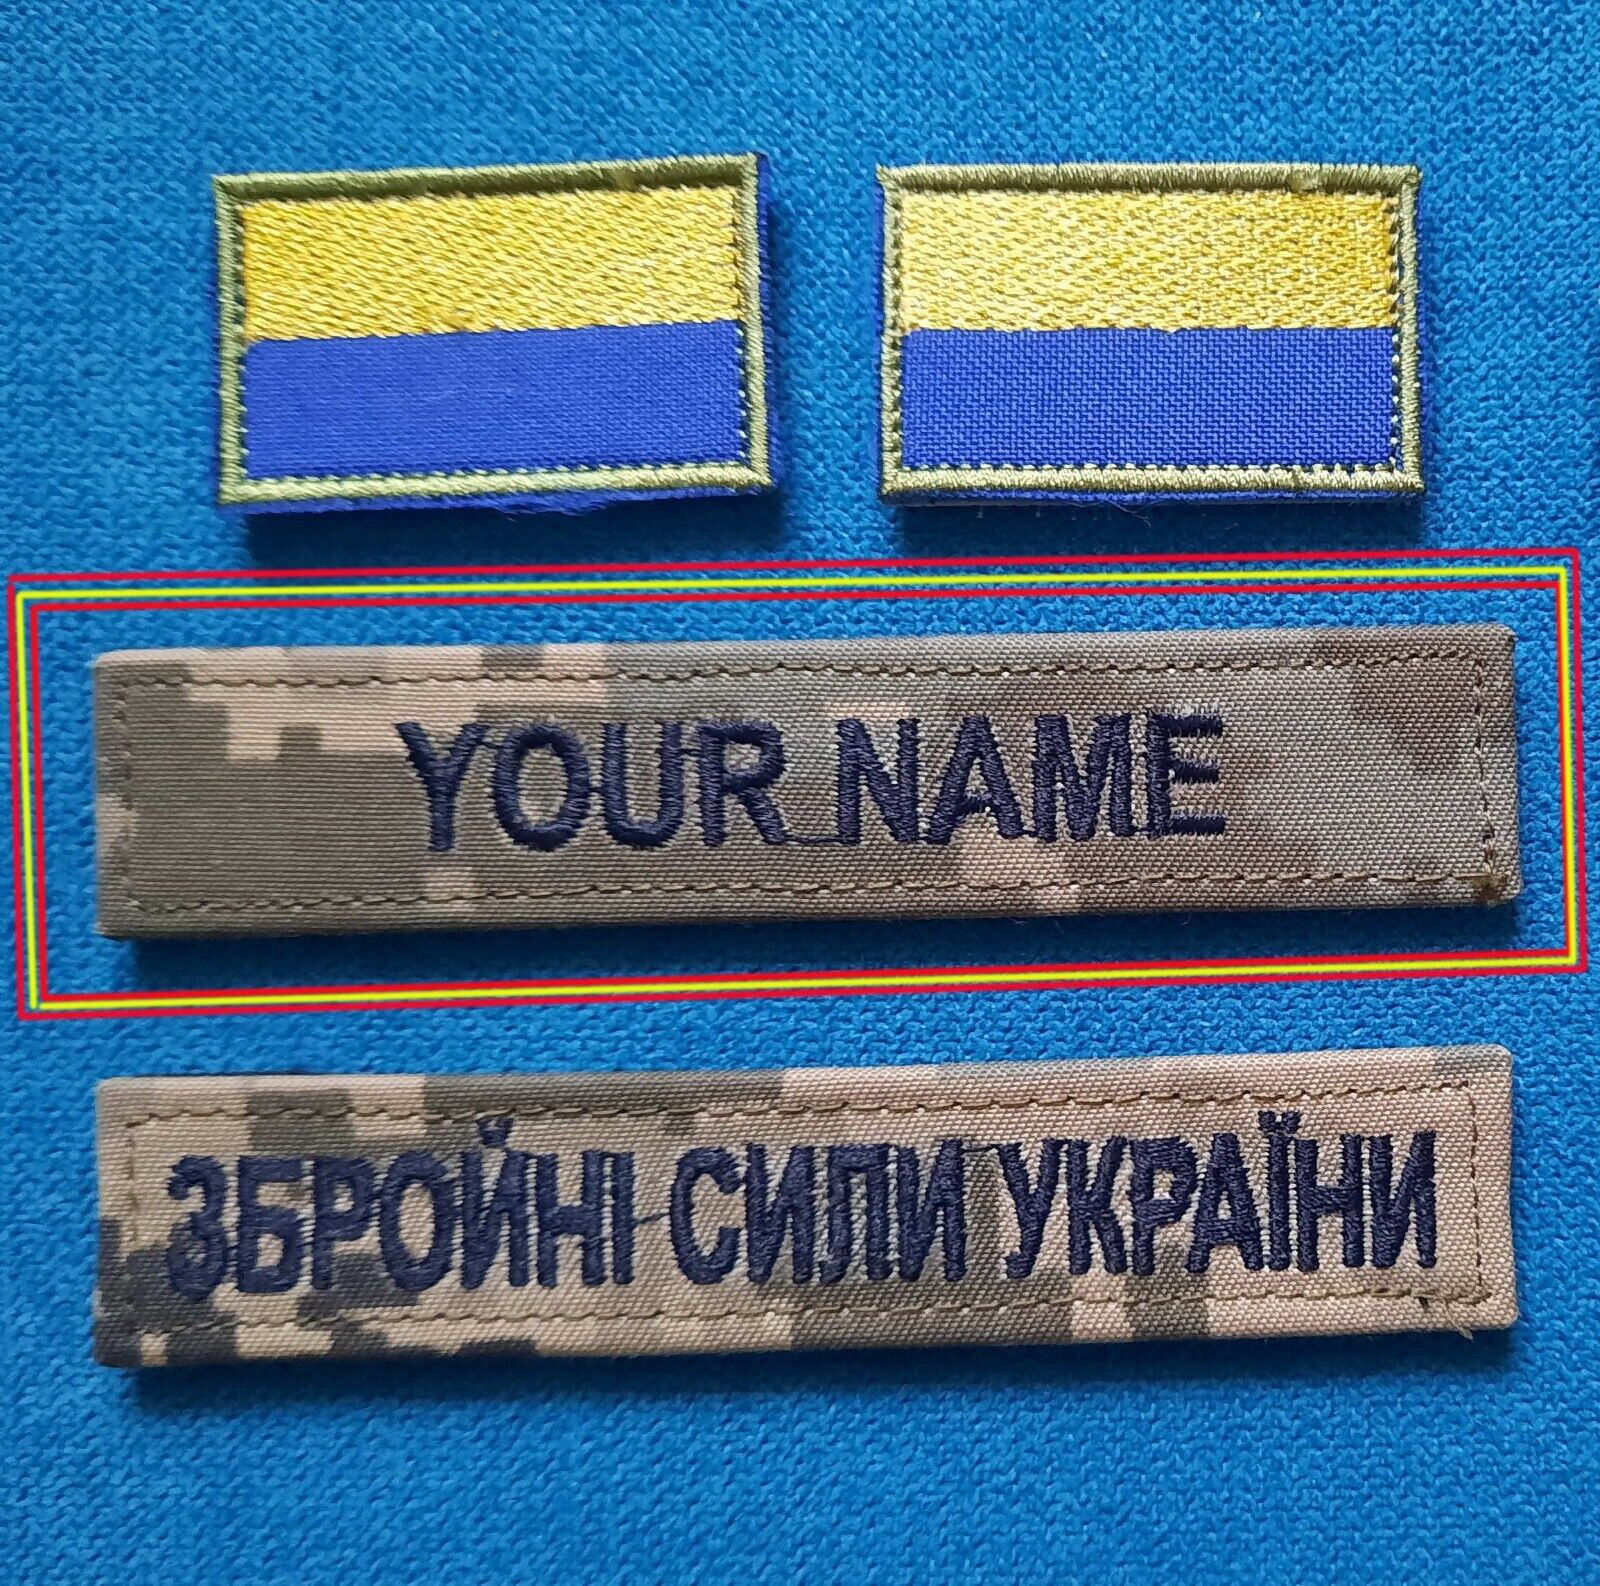 SurName or Call Sign Set Patches Ukrainian Army Armed Forces Ukraine War Camo